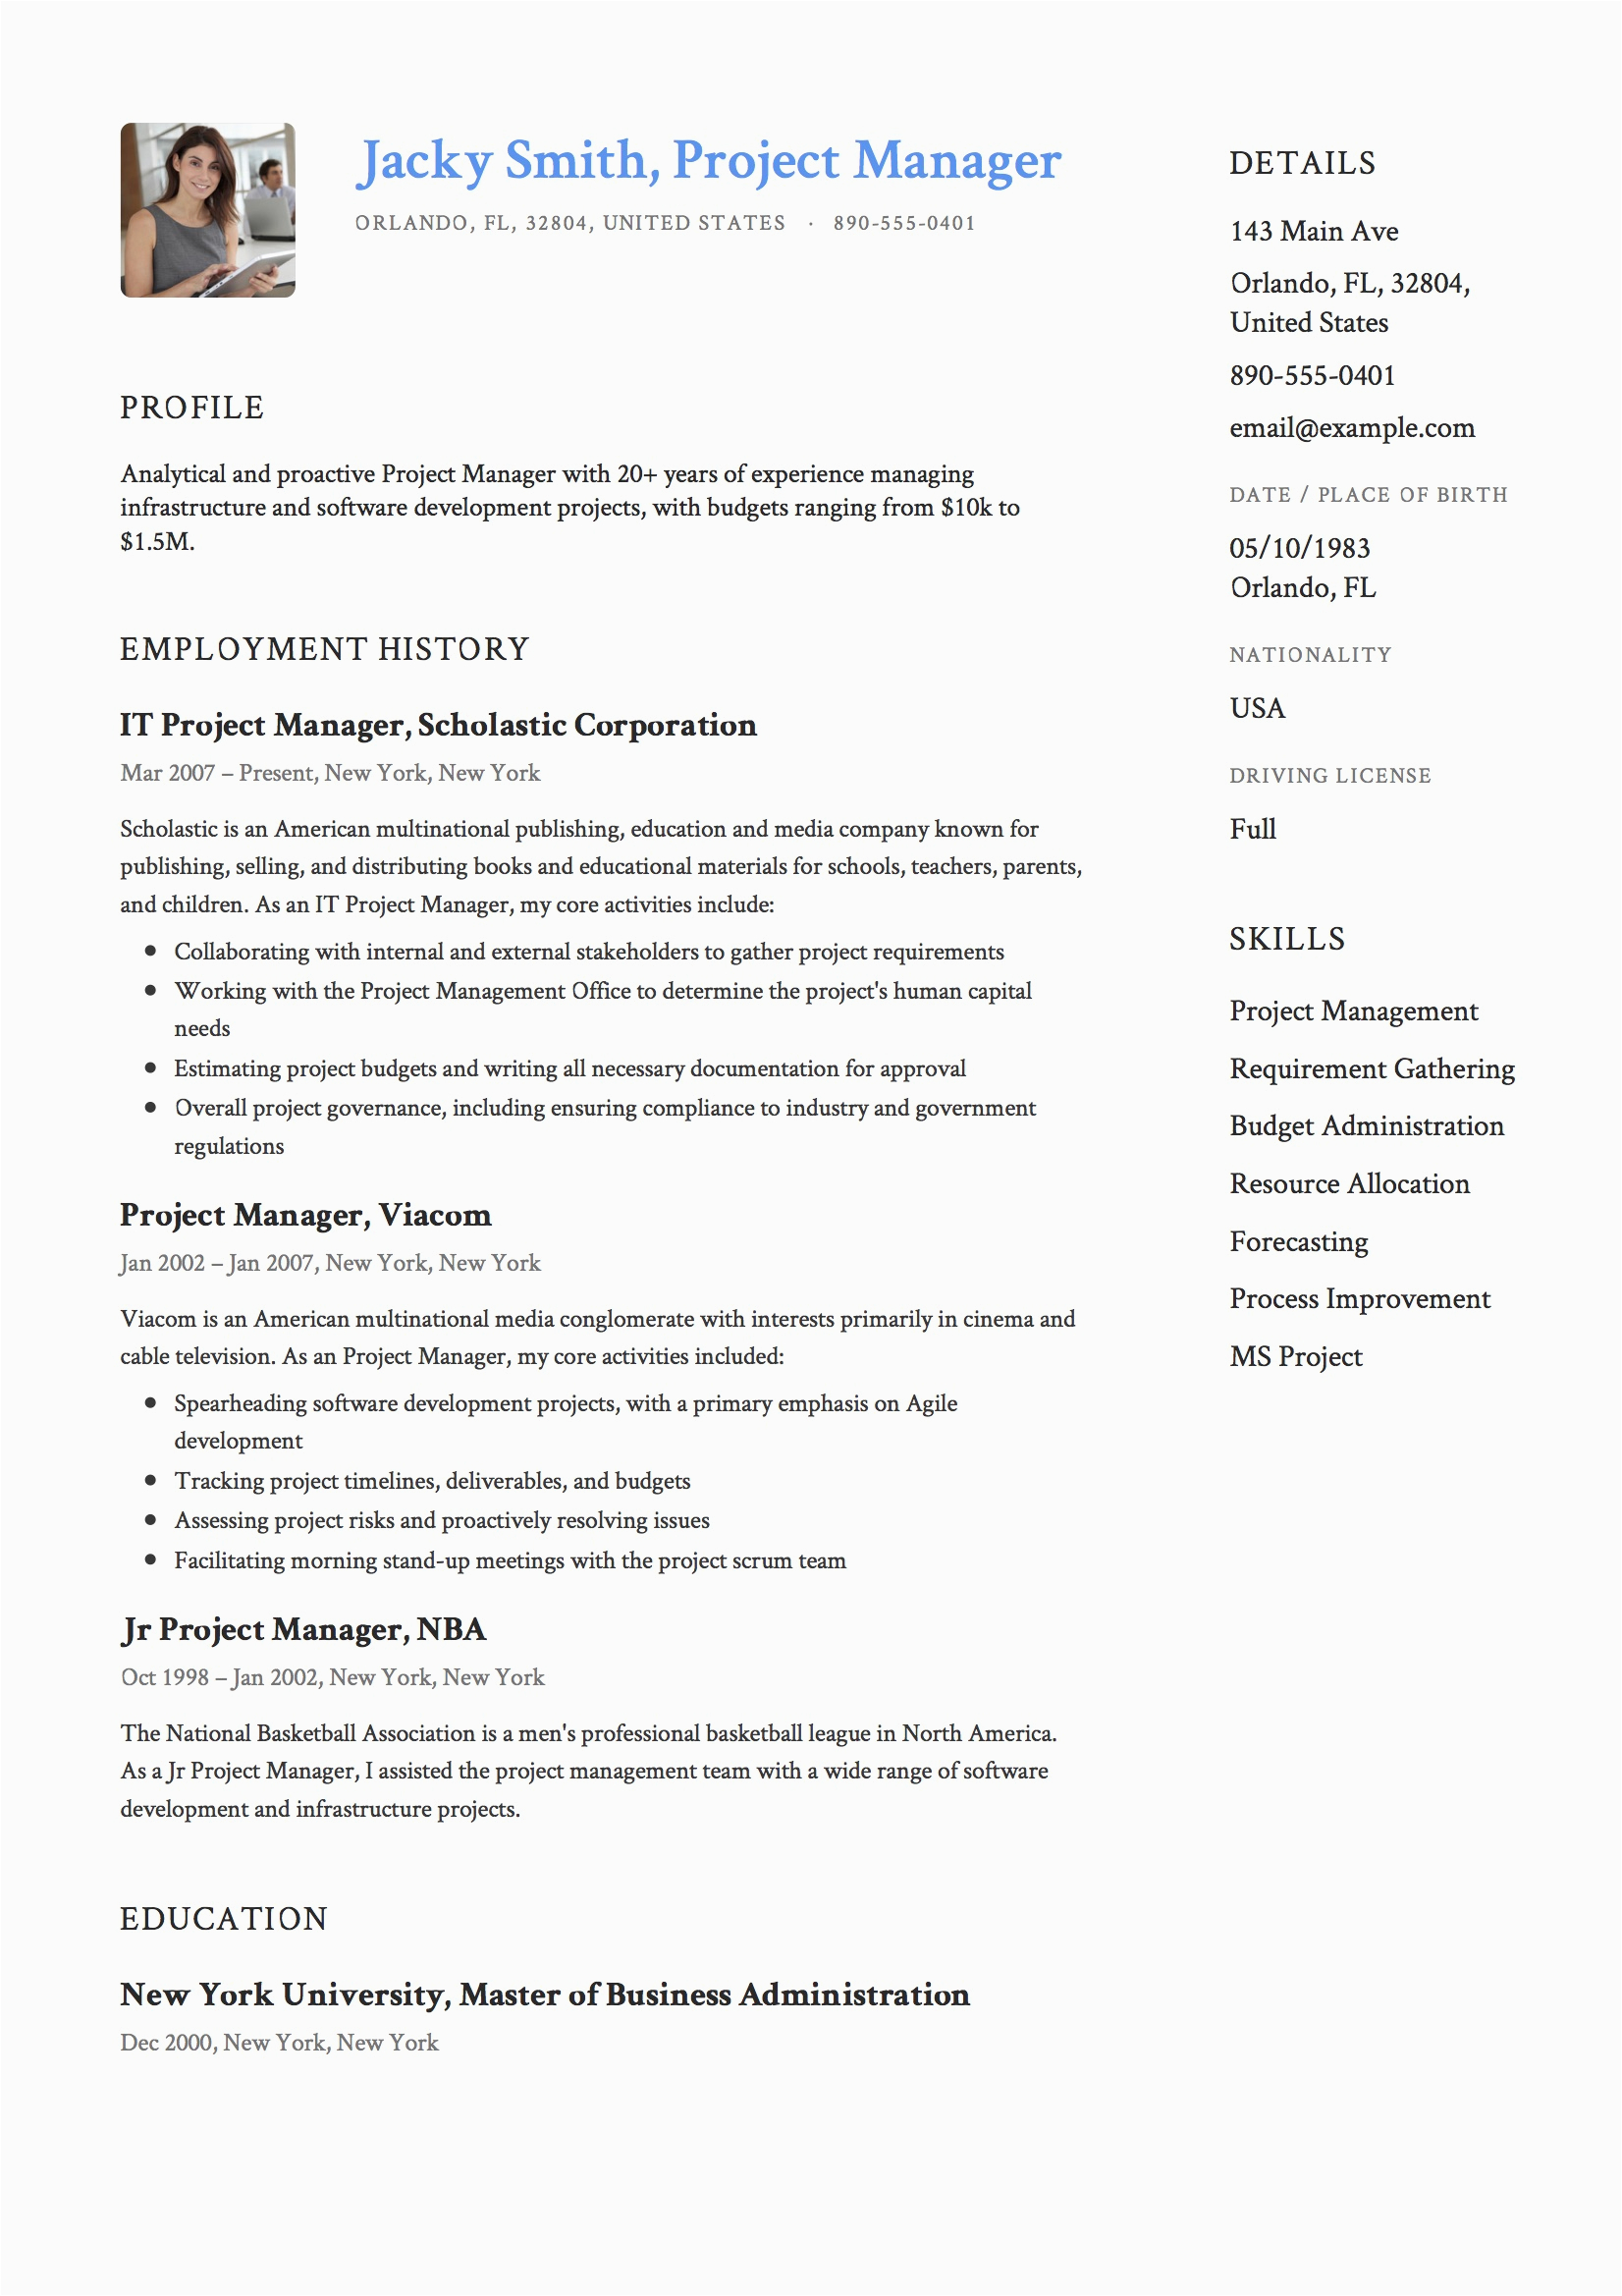 Sample Resume format for Project Manager Project Manager Resume & Full Guide